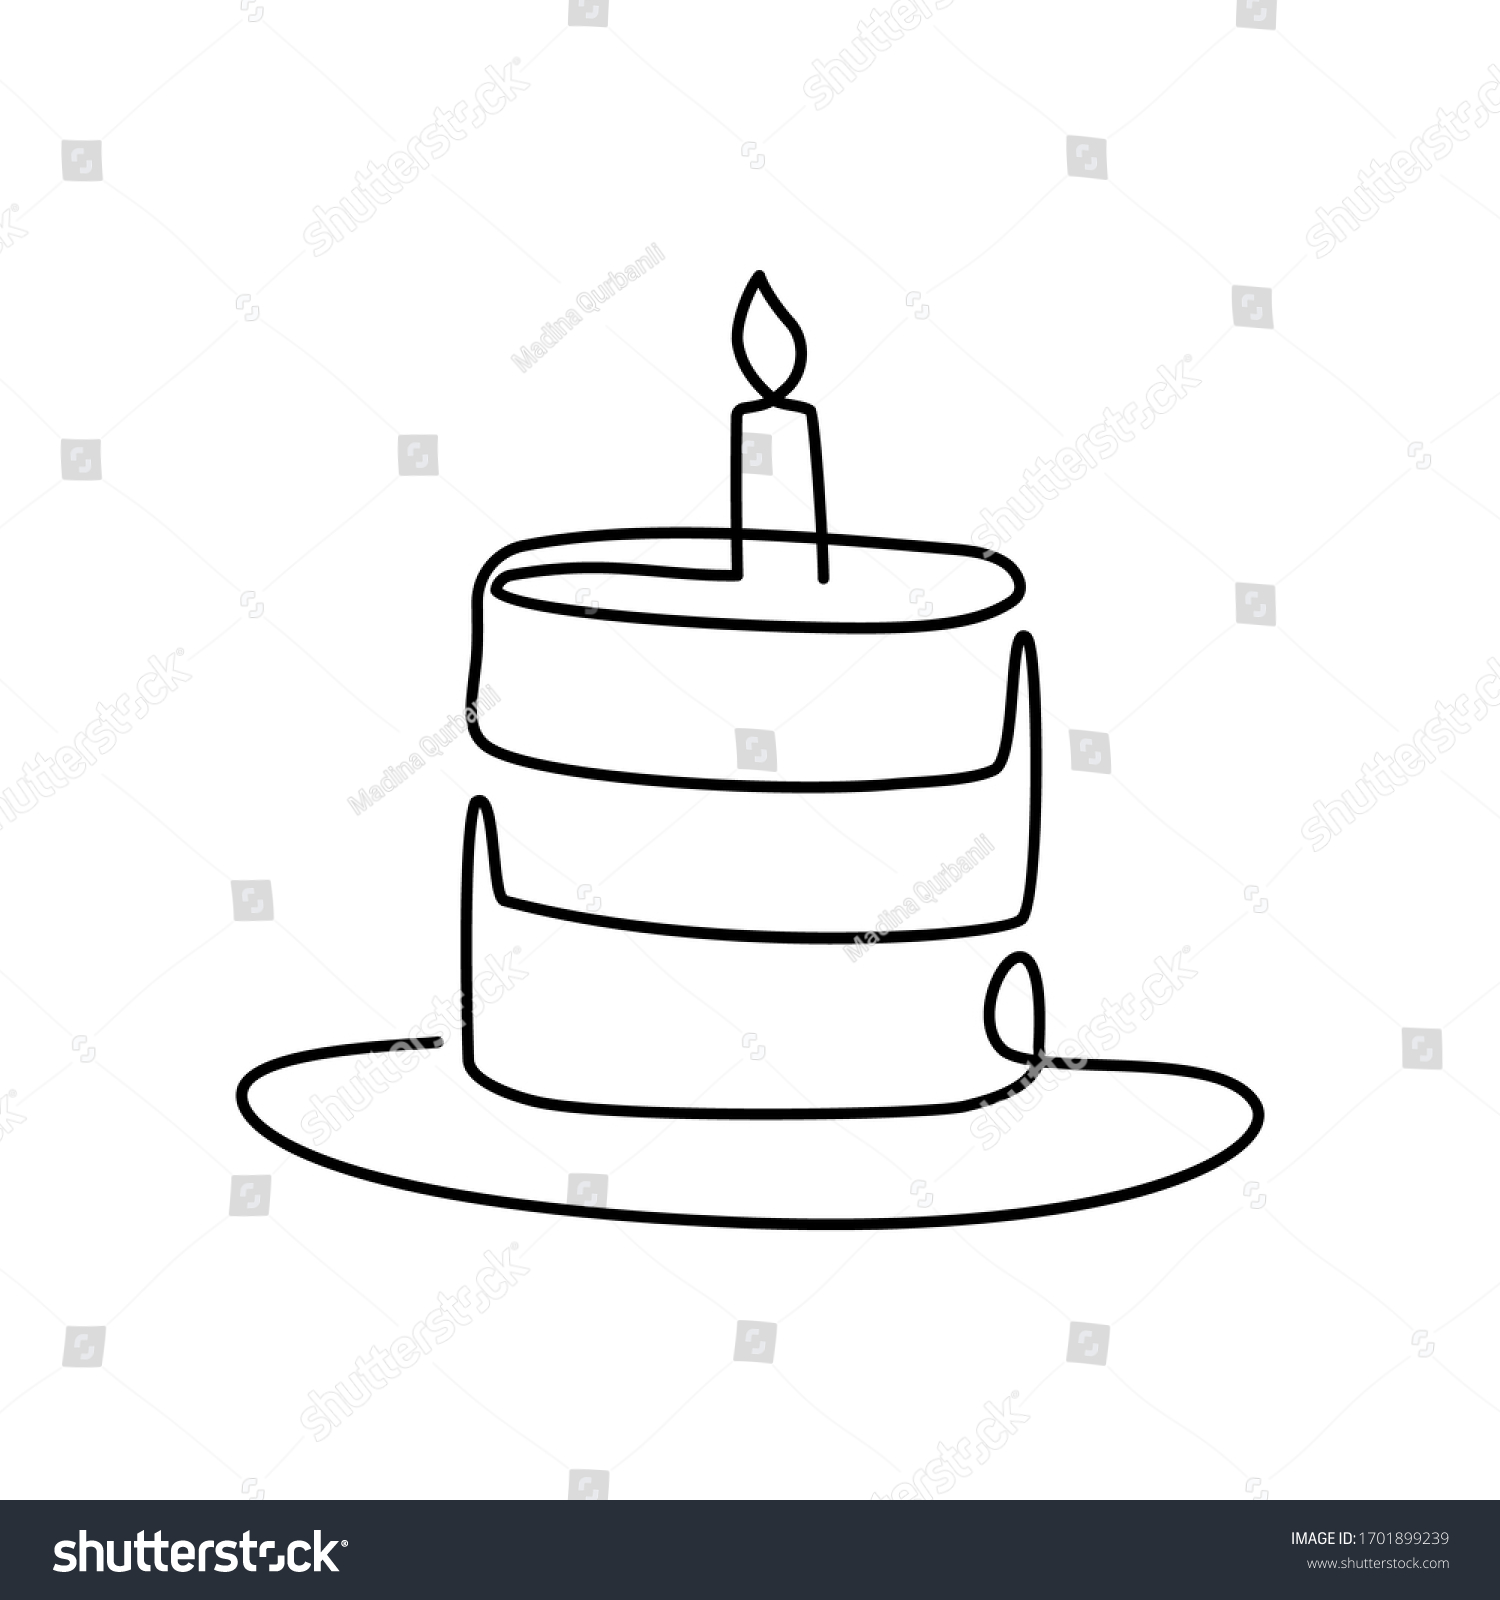 Continuous Line Drawing Birthday Cake With Royalty Free Stock Vector 1701899239 1809